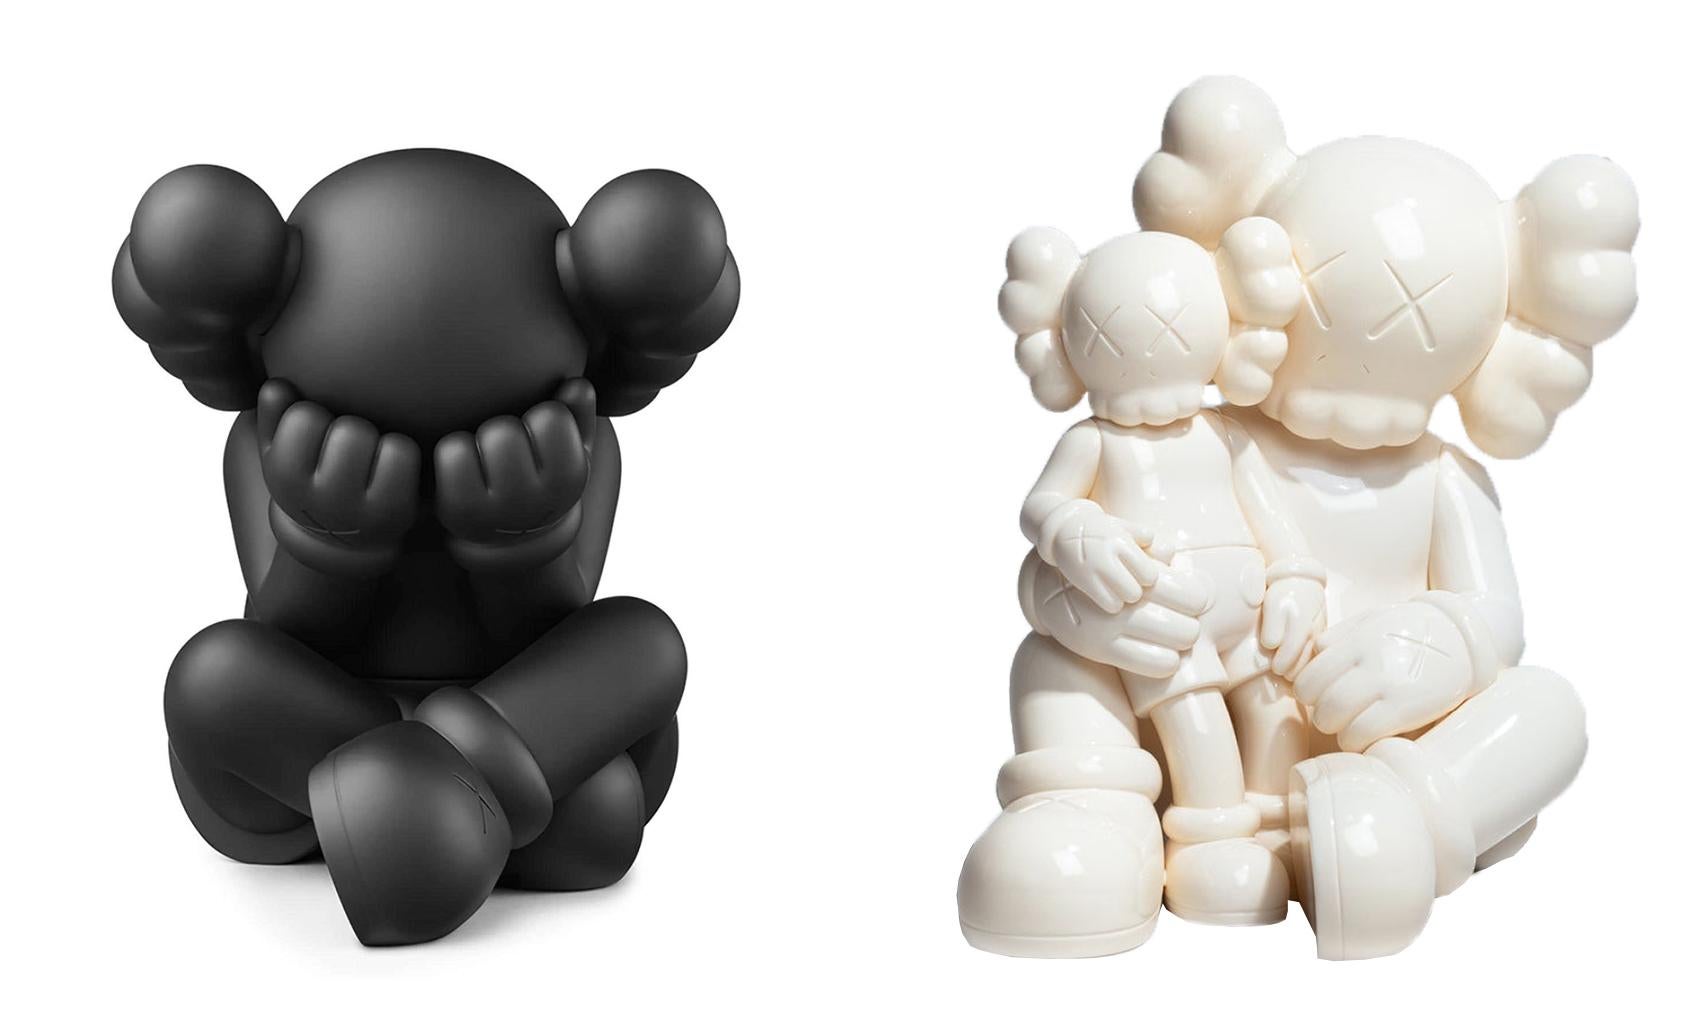 KAWS SEPARATED & KAWS Holiday Changbai (set of 2 works):
These highly collectible KAWS SEPARATED and KAWS HOLIDAY Changbai figures are derived from the Brooklyn based artist’s larger scale sculpture of same (originally constructed in 2019), and is a